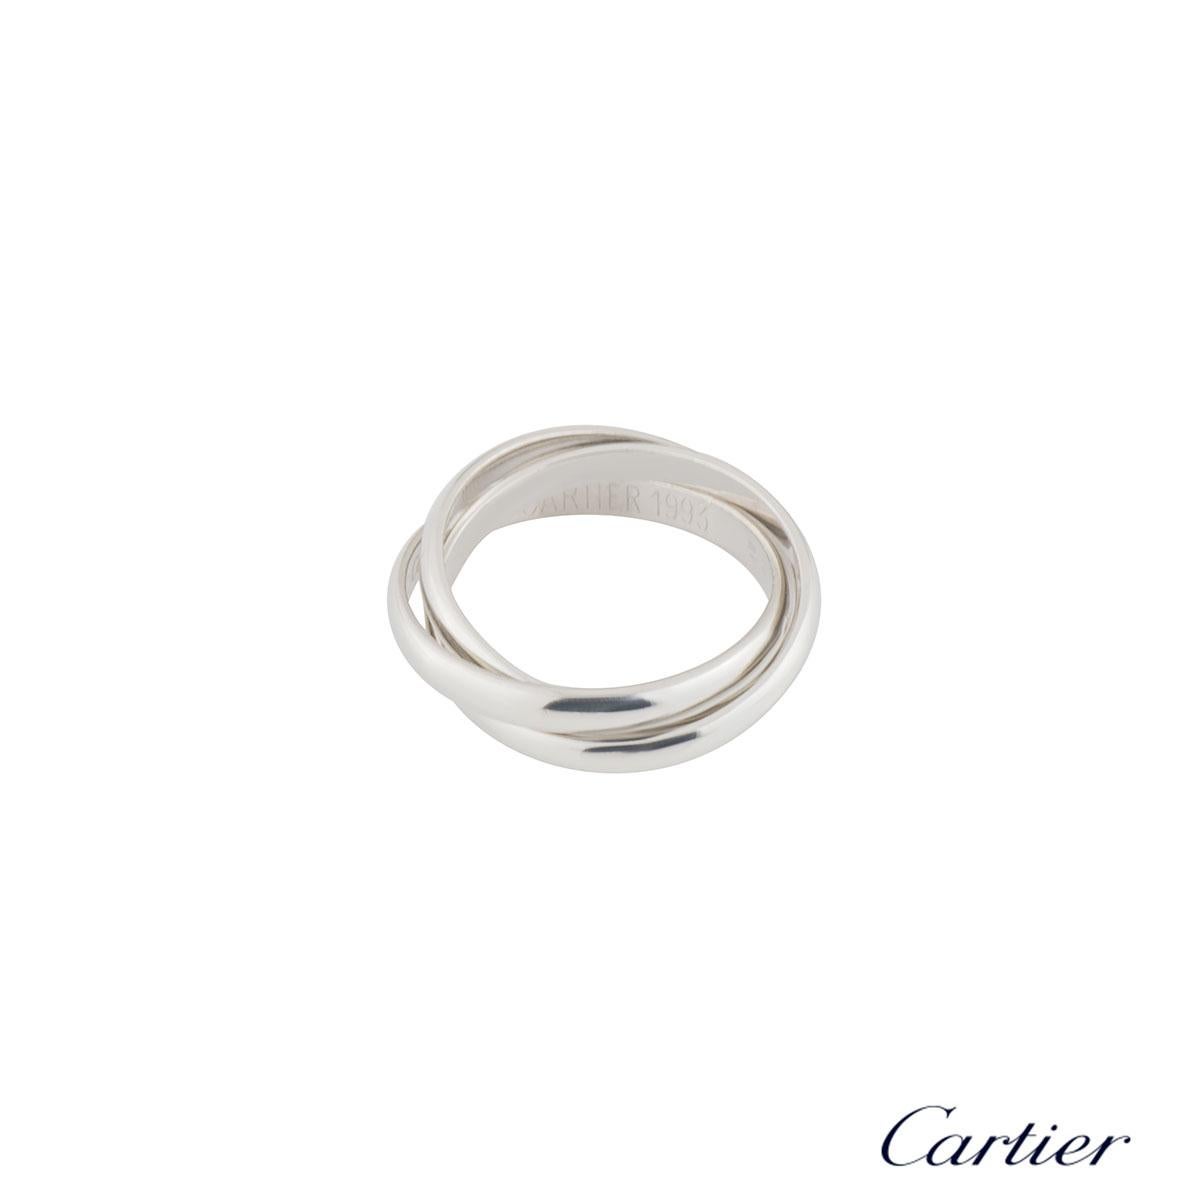 A lovely platinum Cartier ring from the Trinity de Cartier collection. The ring comprises of three interlocking 2mm bands. The ring is a size EU 52/UK M/US 6 and has a gross weight of 7.90 grams.

The ring comes complete with a presentation box and